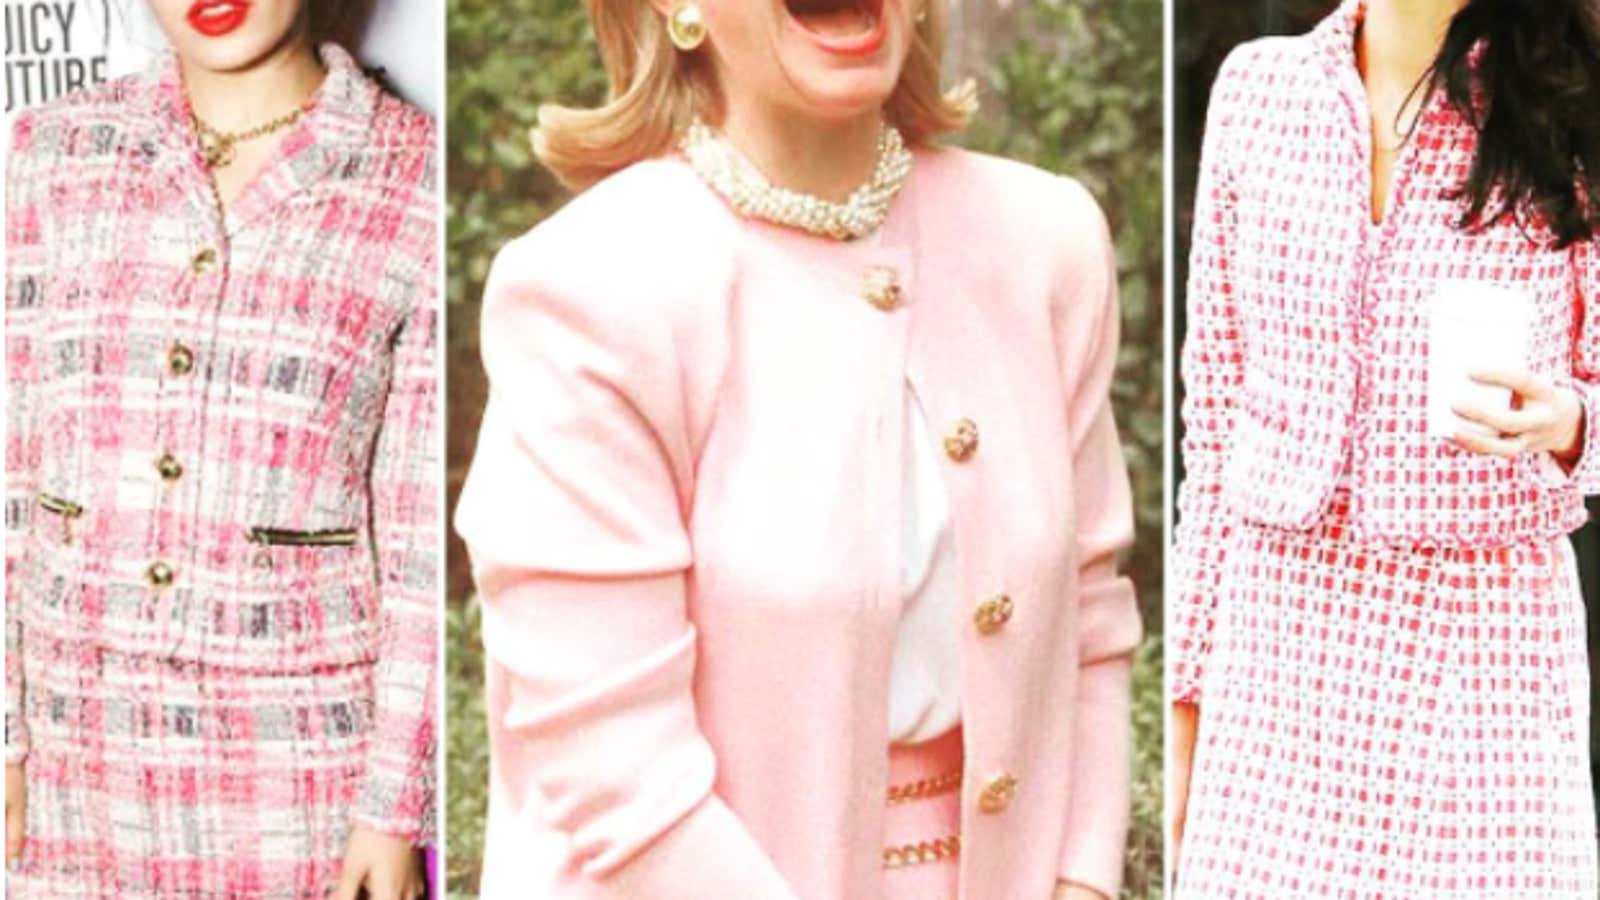 This Instagram account shows Hillary Clinton as a style icon on par with Prince and Beyoncé